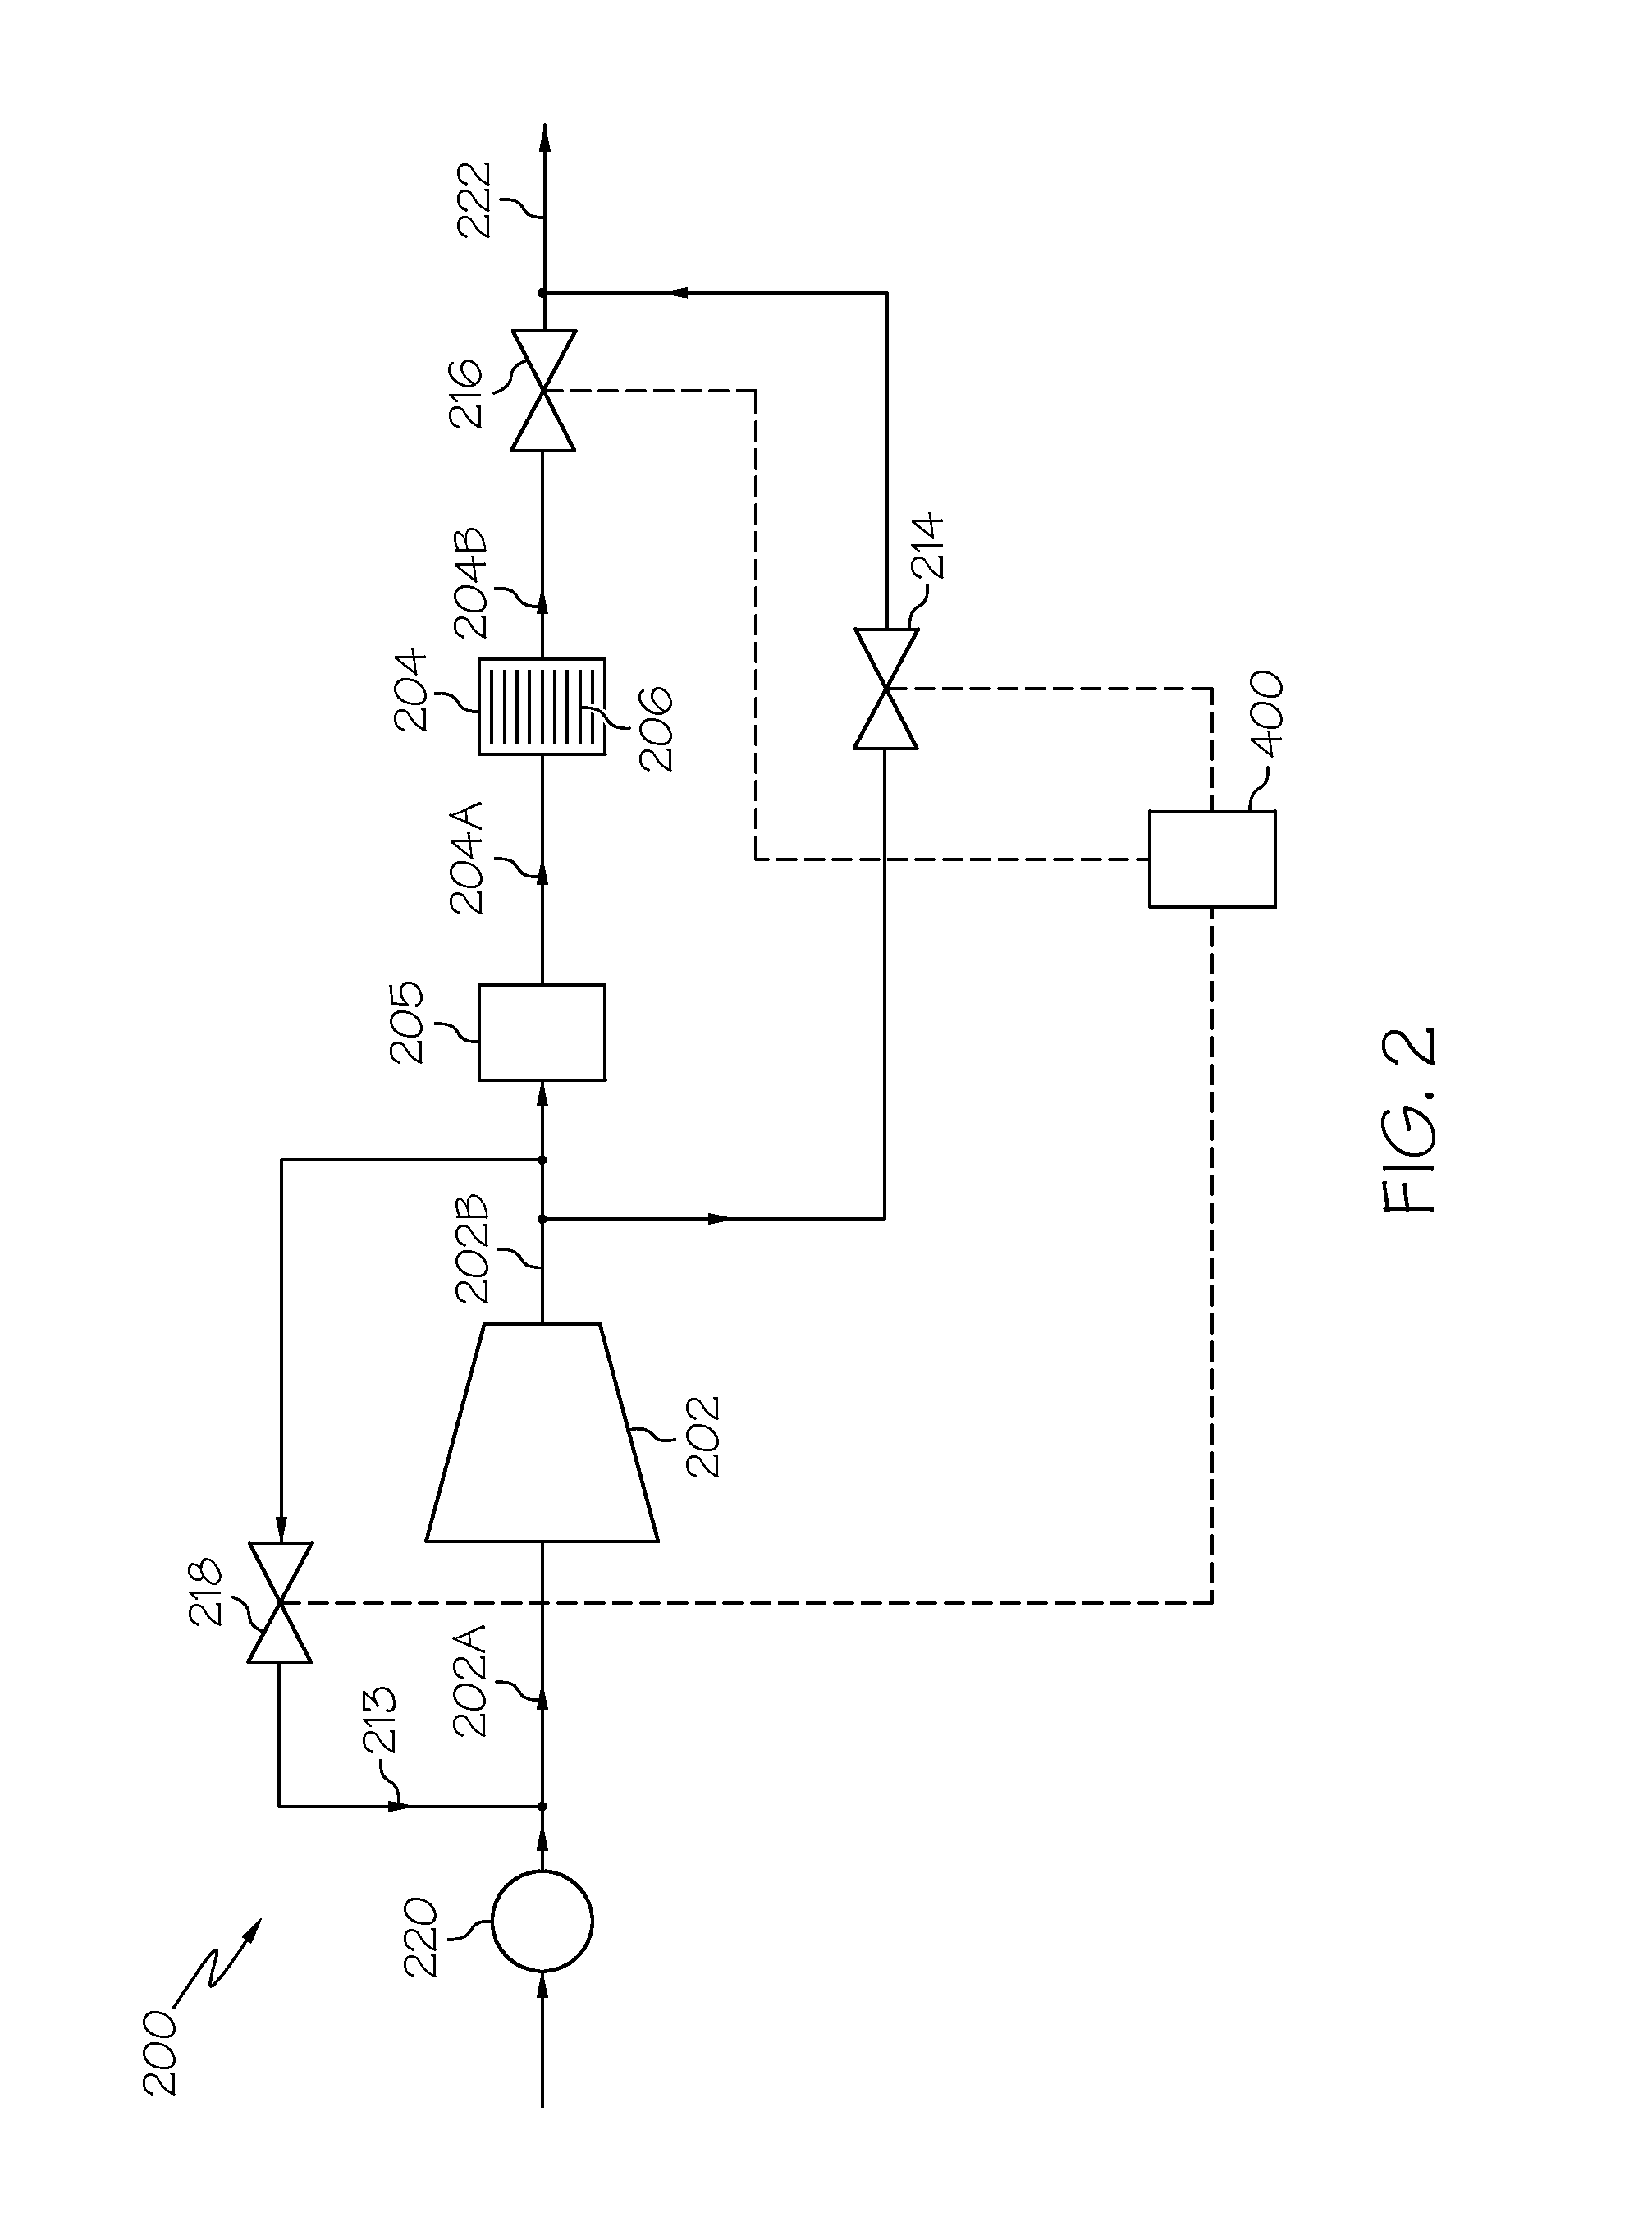 Cathode flow split control and pressure control for a vehicle fuel cell power system